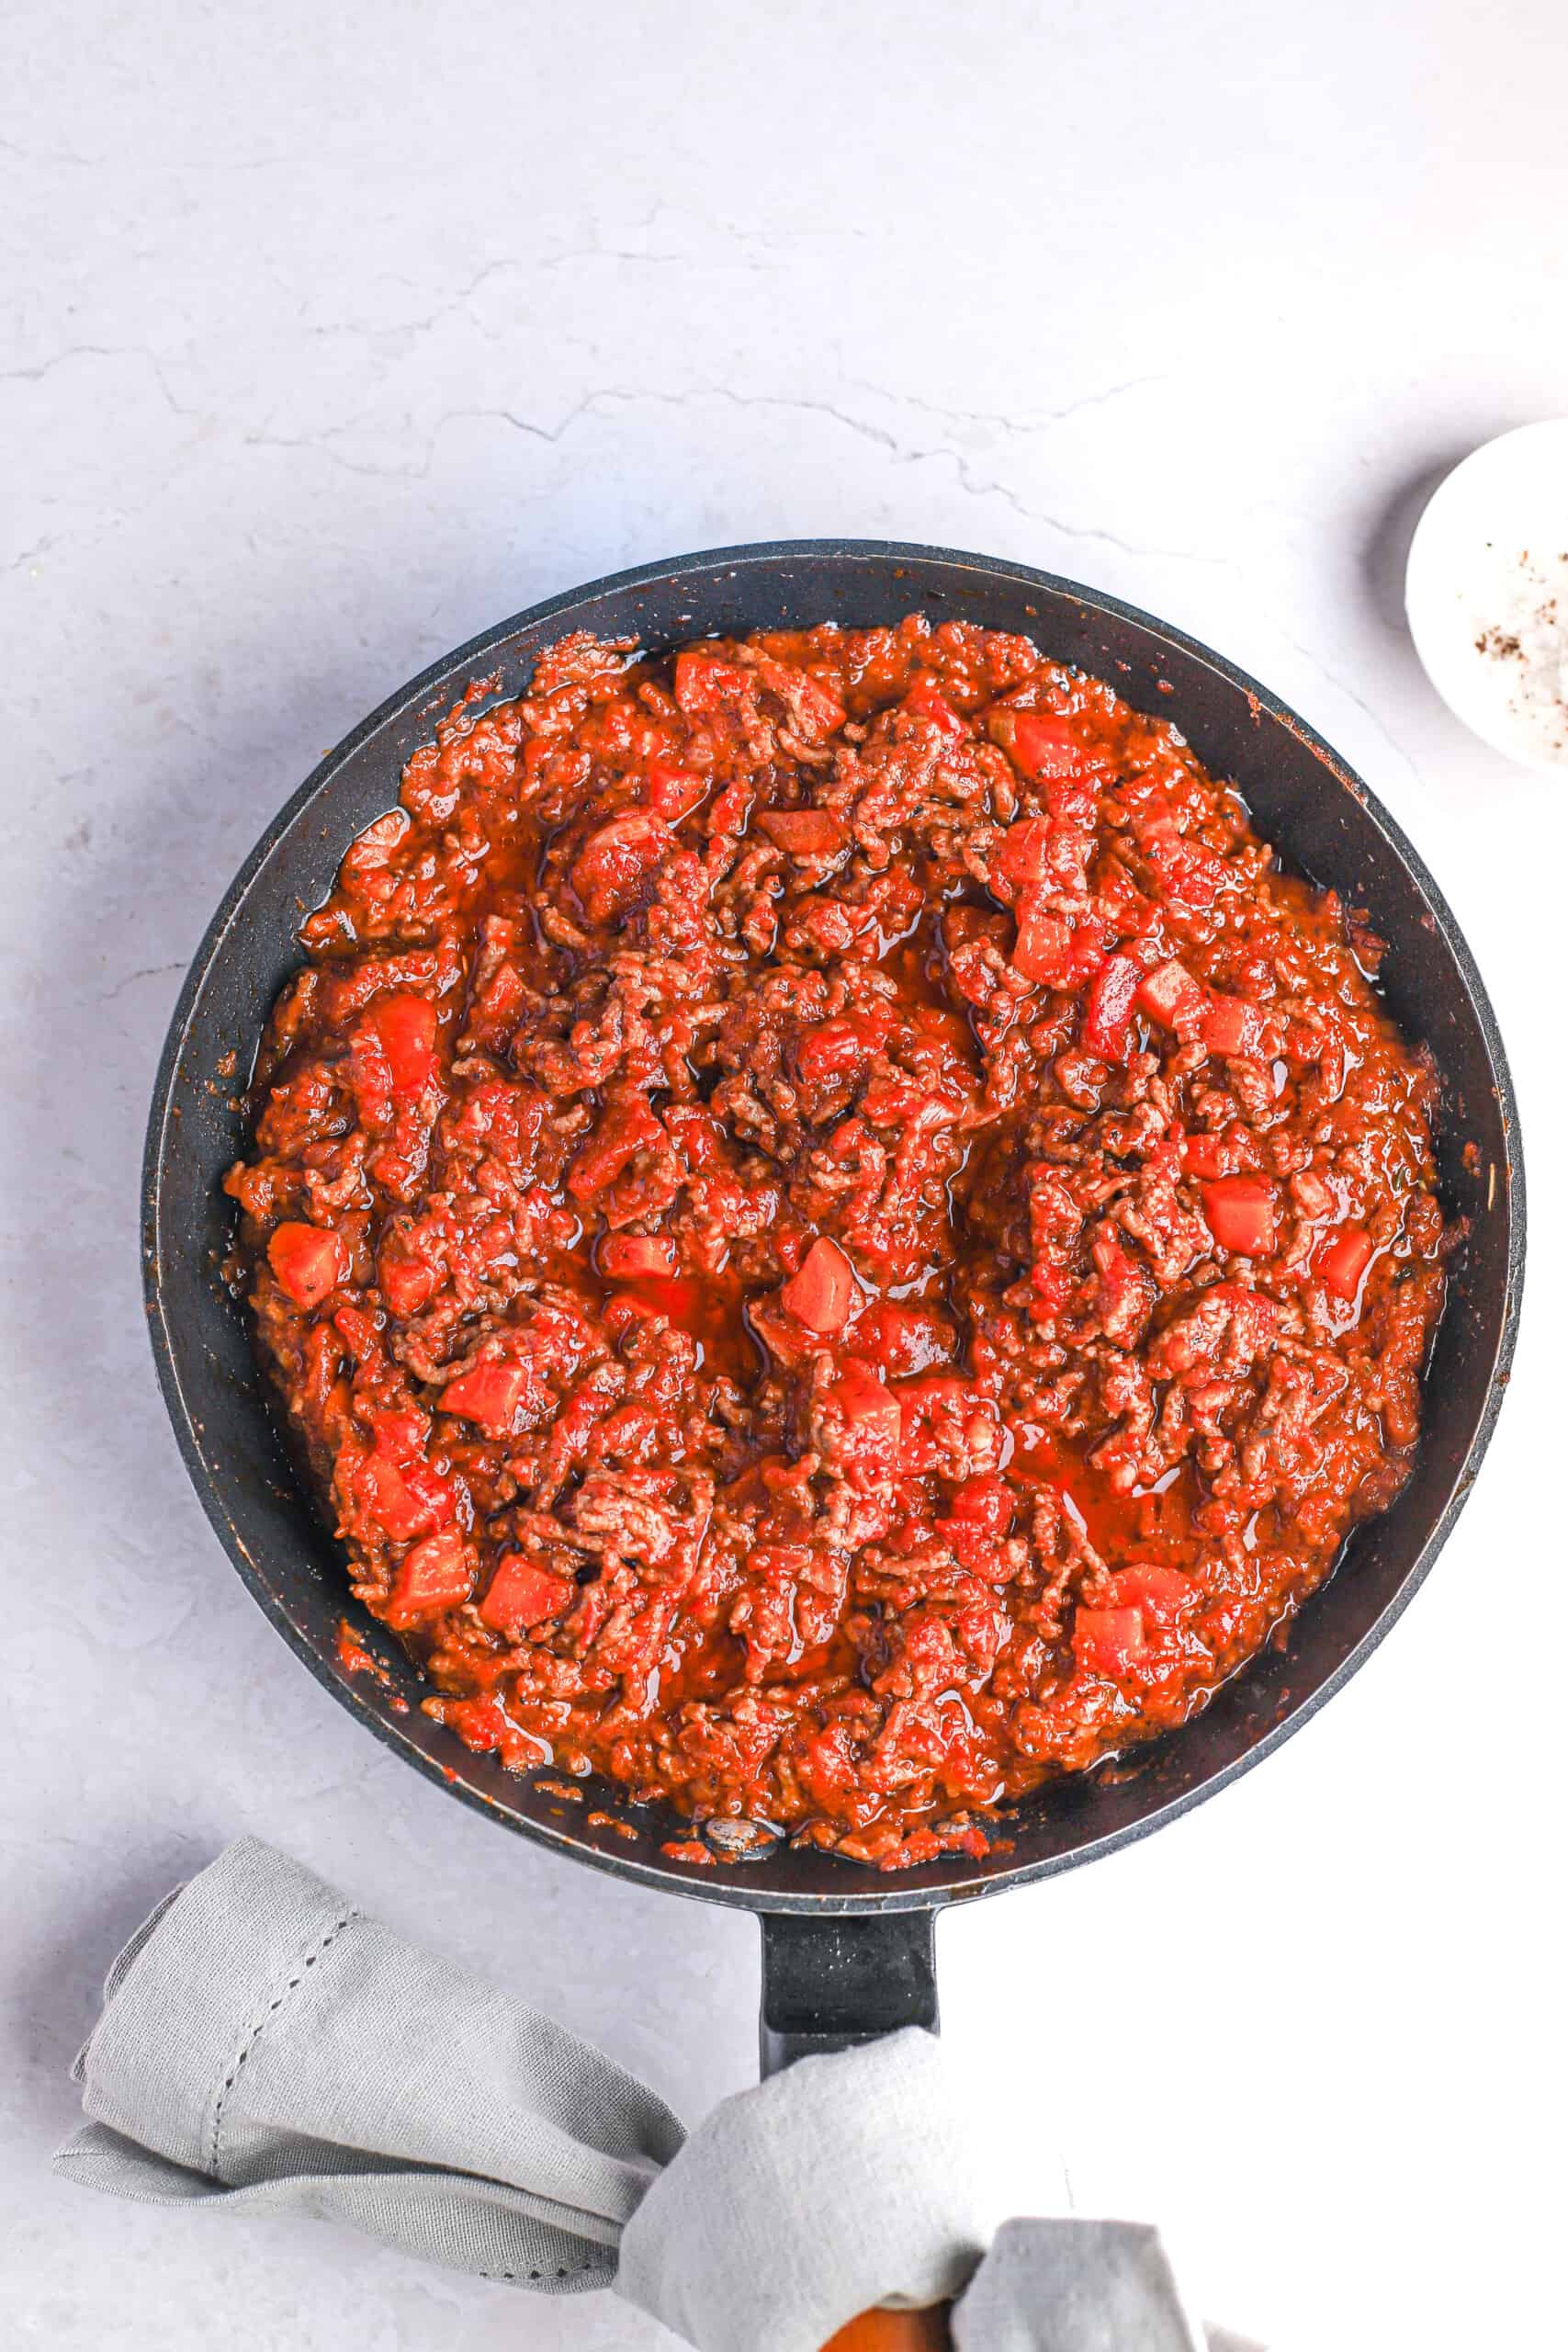 A skillet full of homemade bolognese sauce with a towel tied around the handle